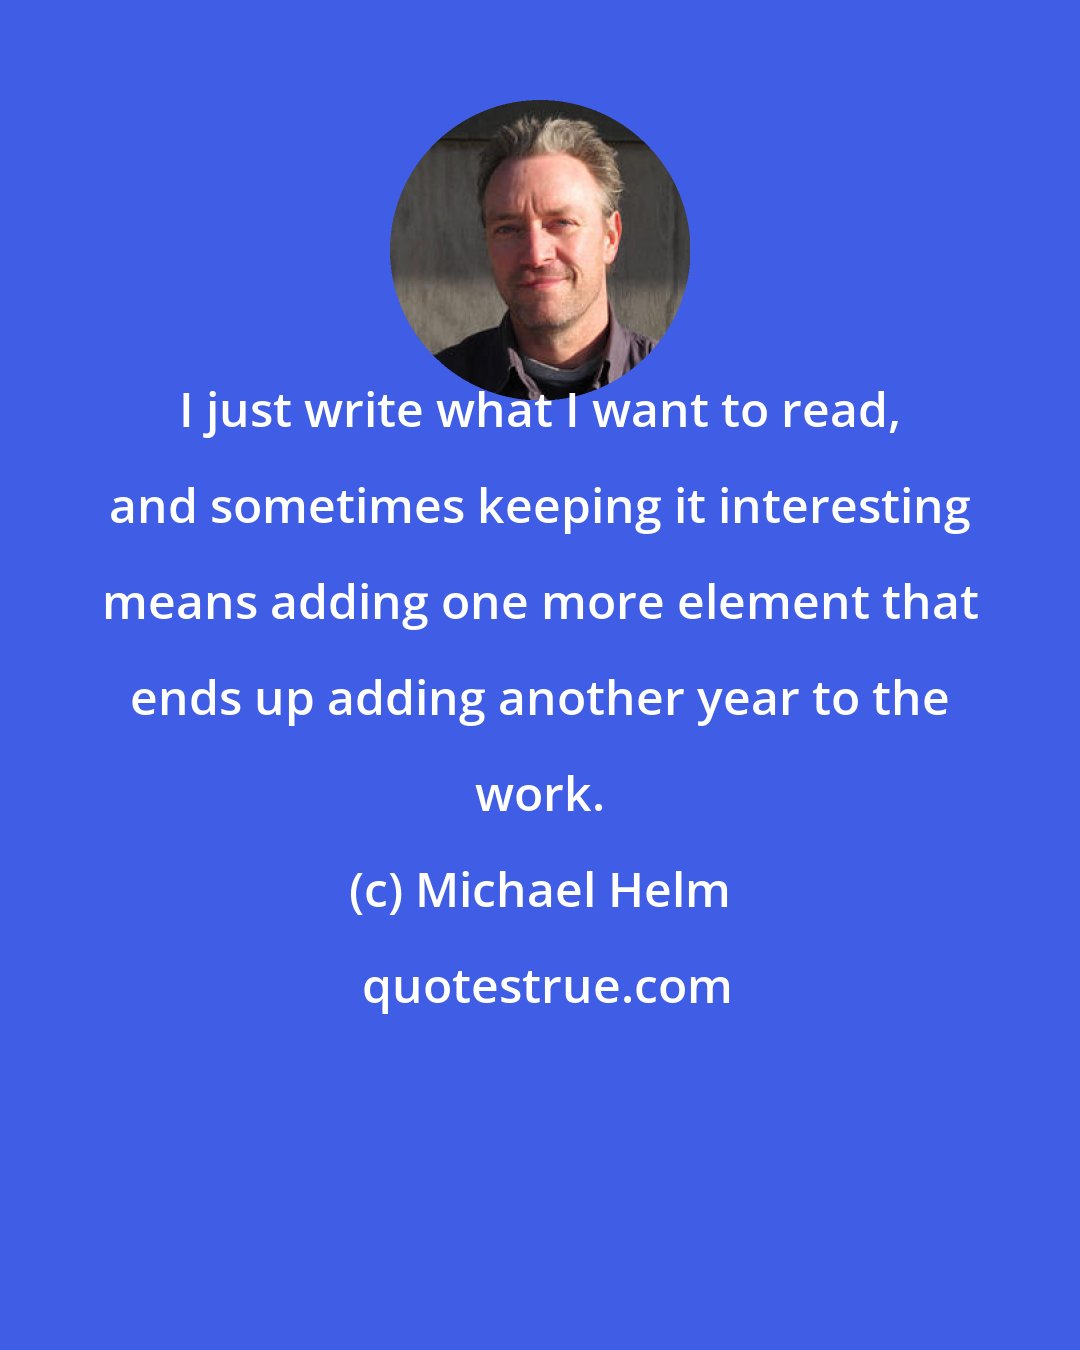 Michael Helm: I just write what I want to read, and sometimes keeping it interesting means adding one more element that ends up adding another year to the work.